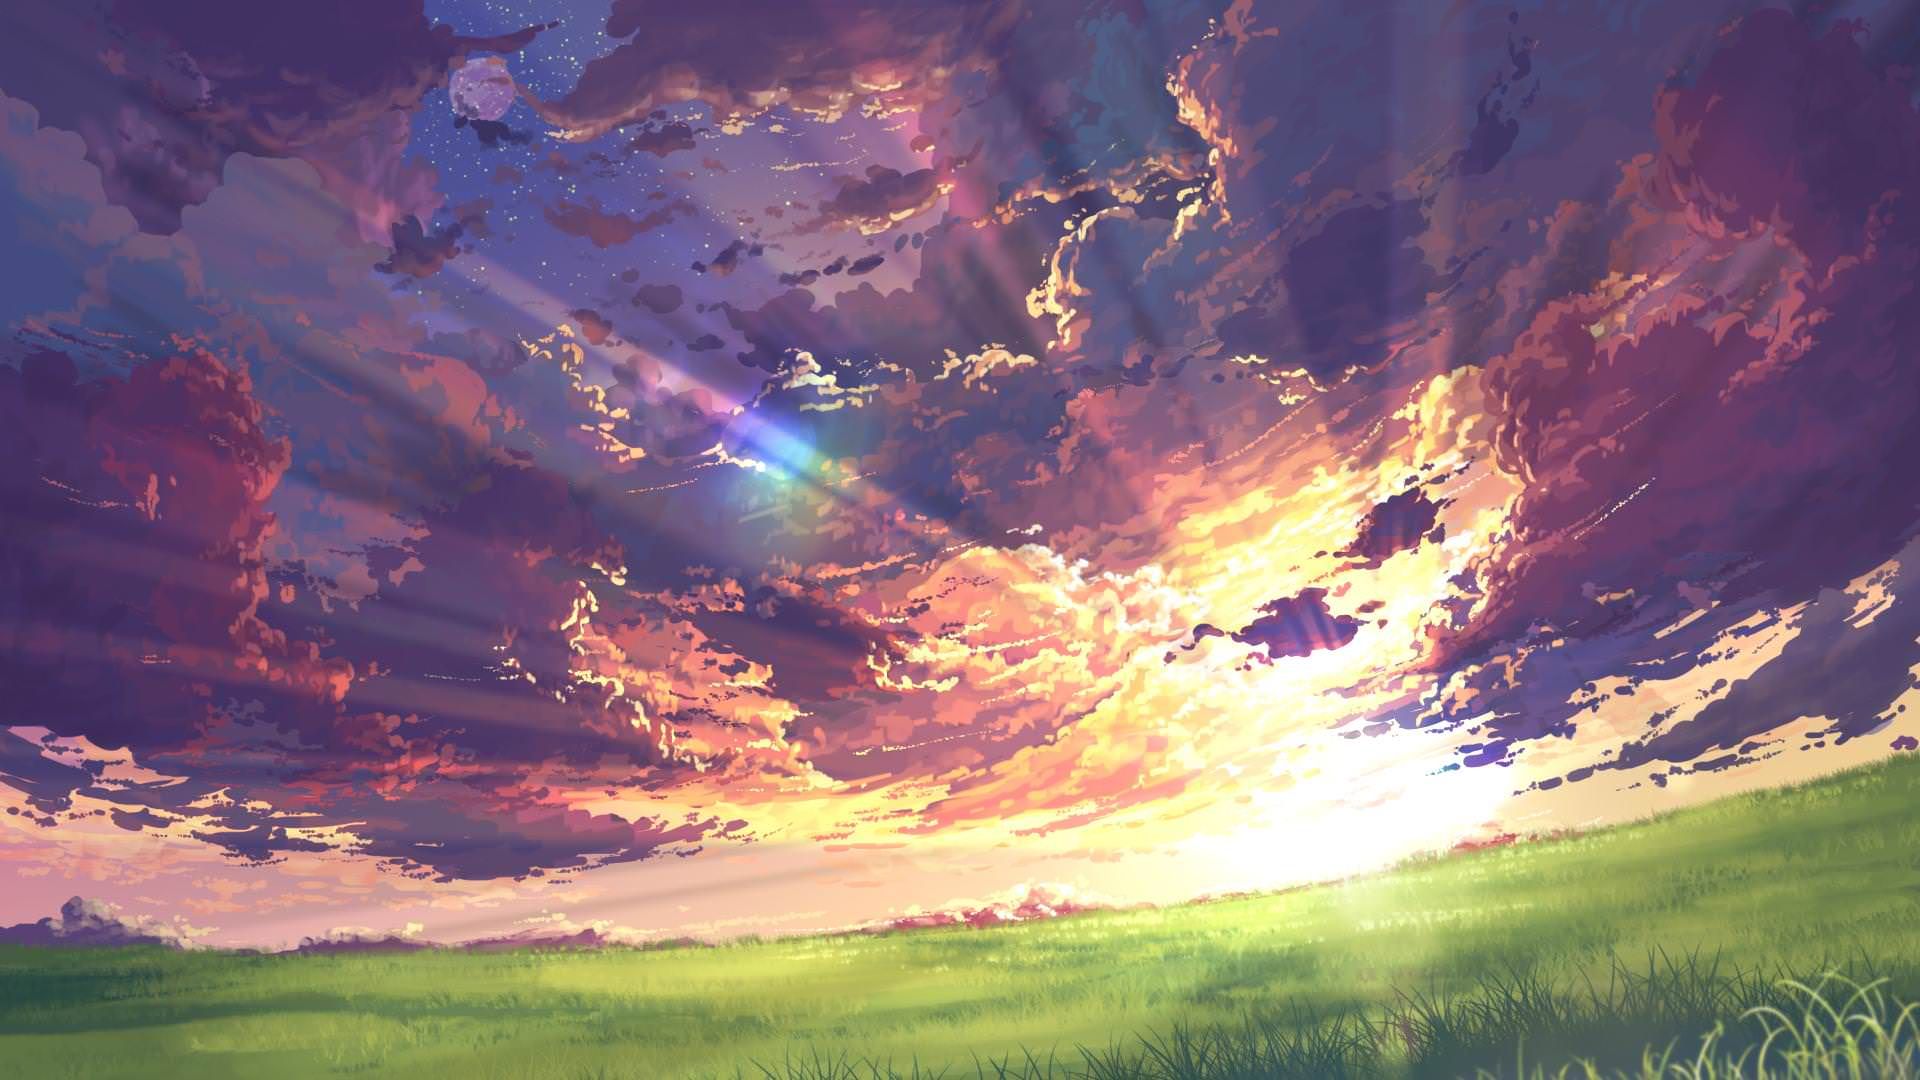 Artistic Field Wallpapers